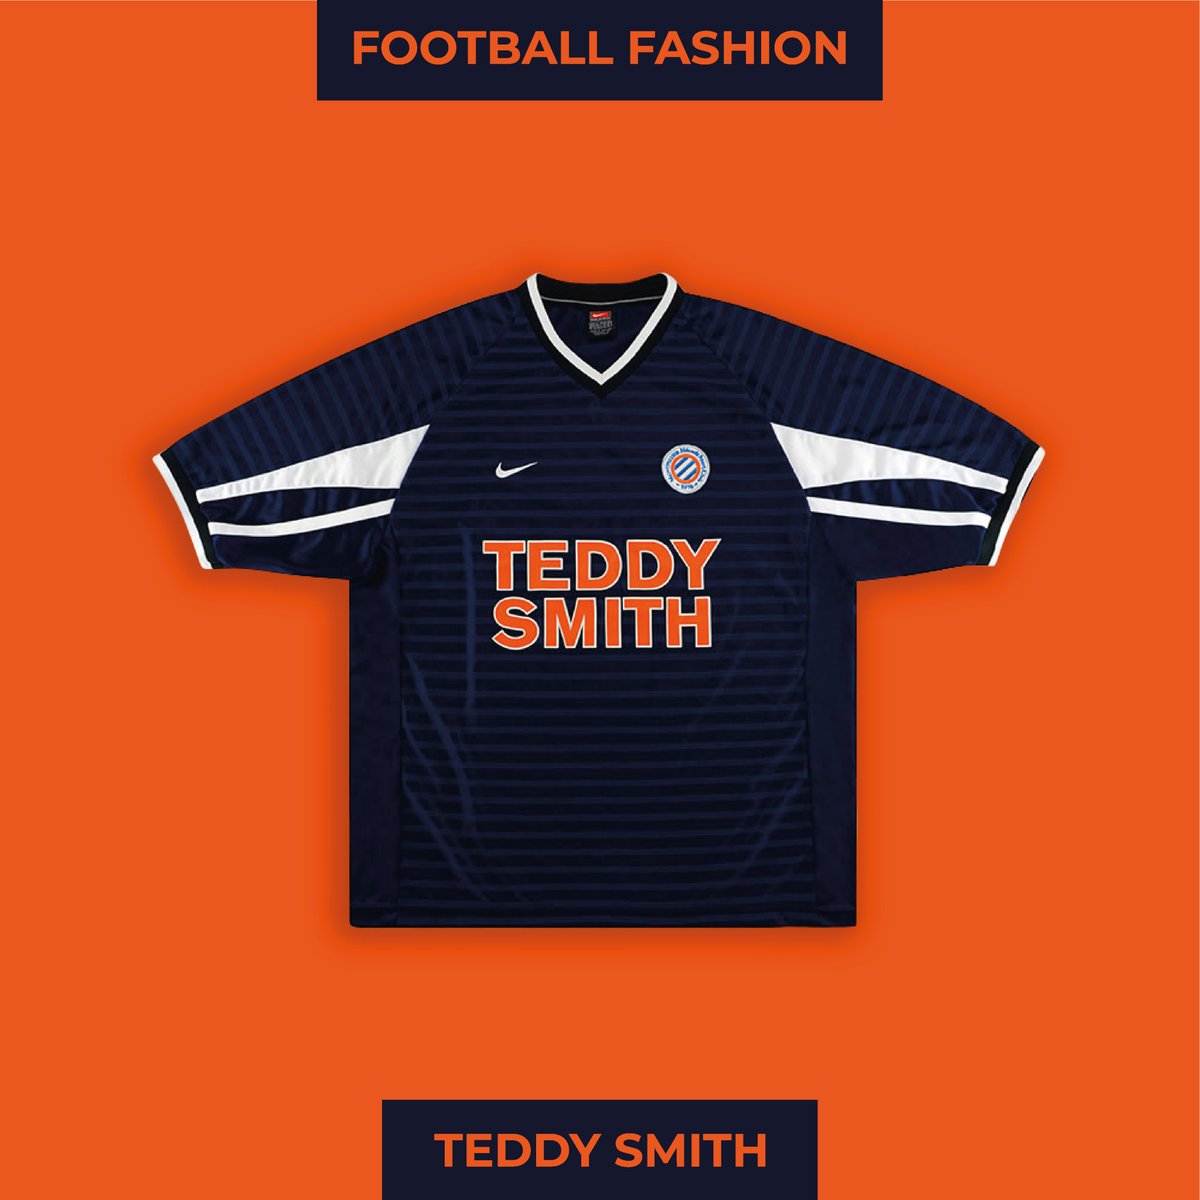 Football Fashion: Montpellier HSC and Teddy SmithCan you think of any other fashion brands that have sponsored a football team?